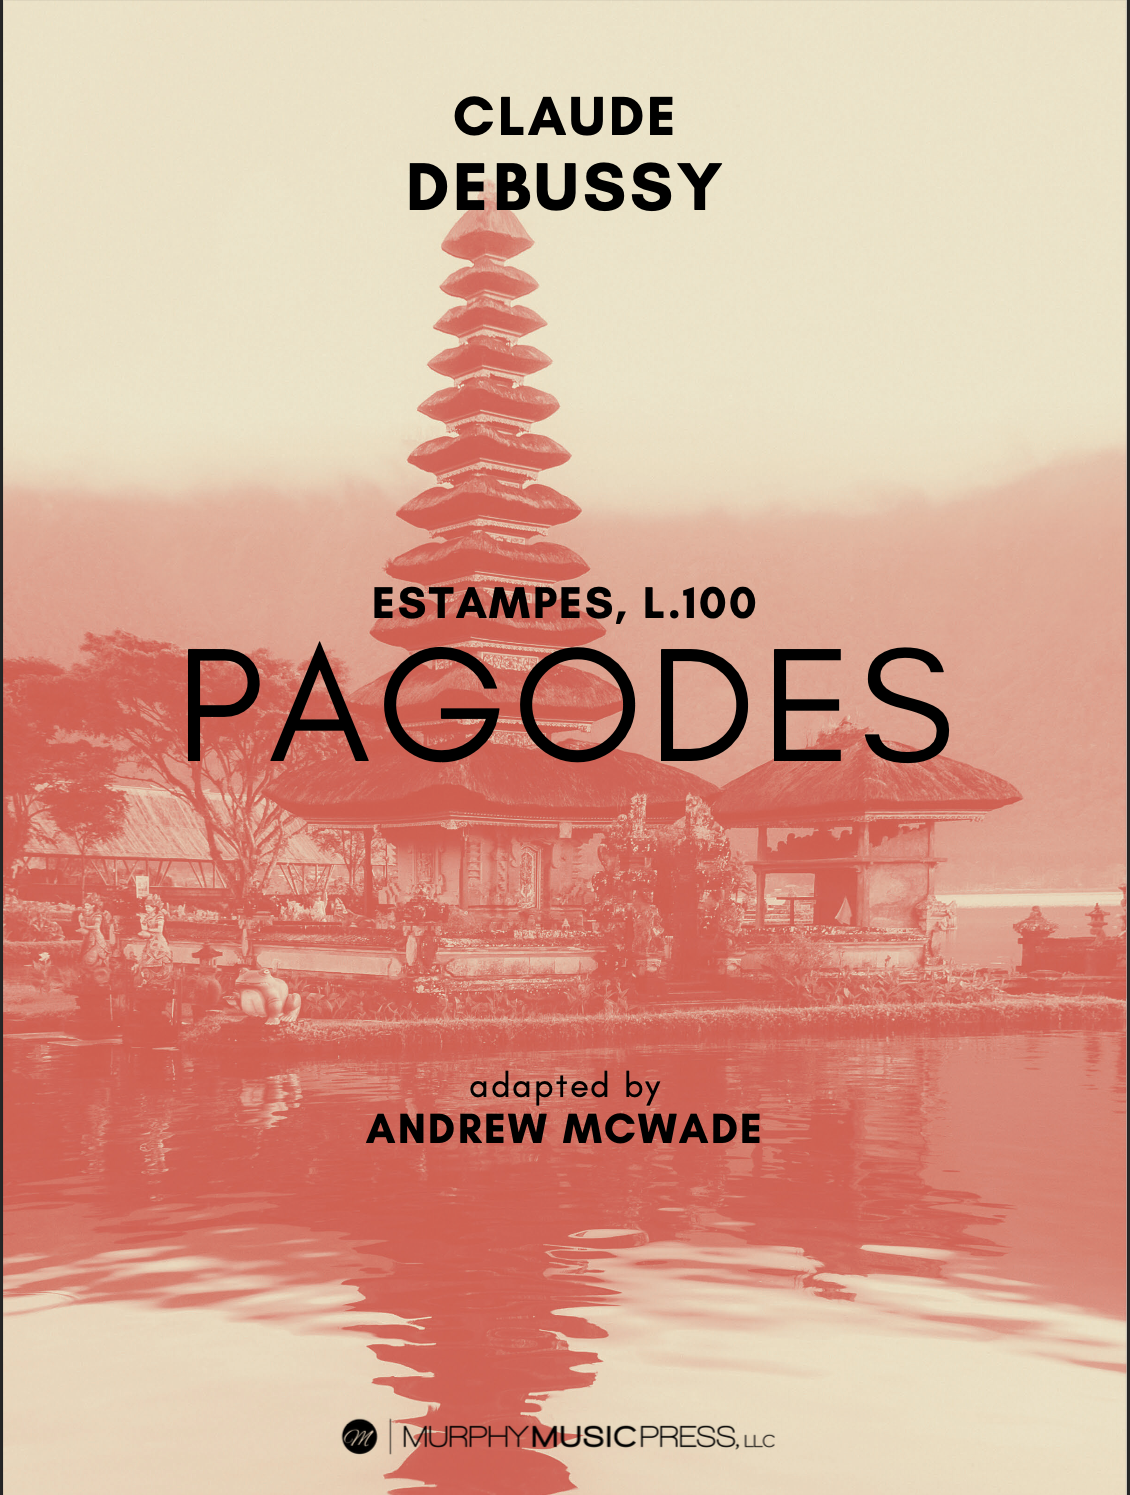 Pagodes by Claude Debussy adapted by Andrew McWade